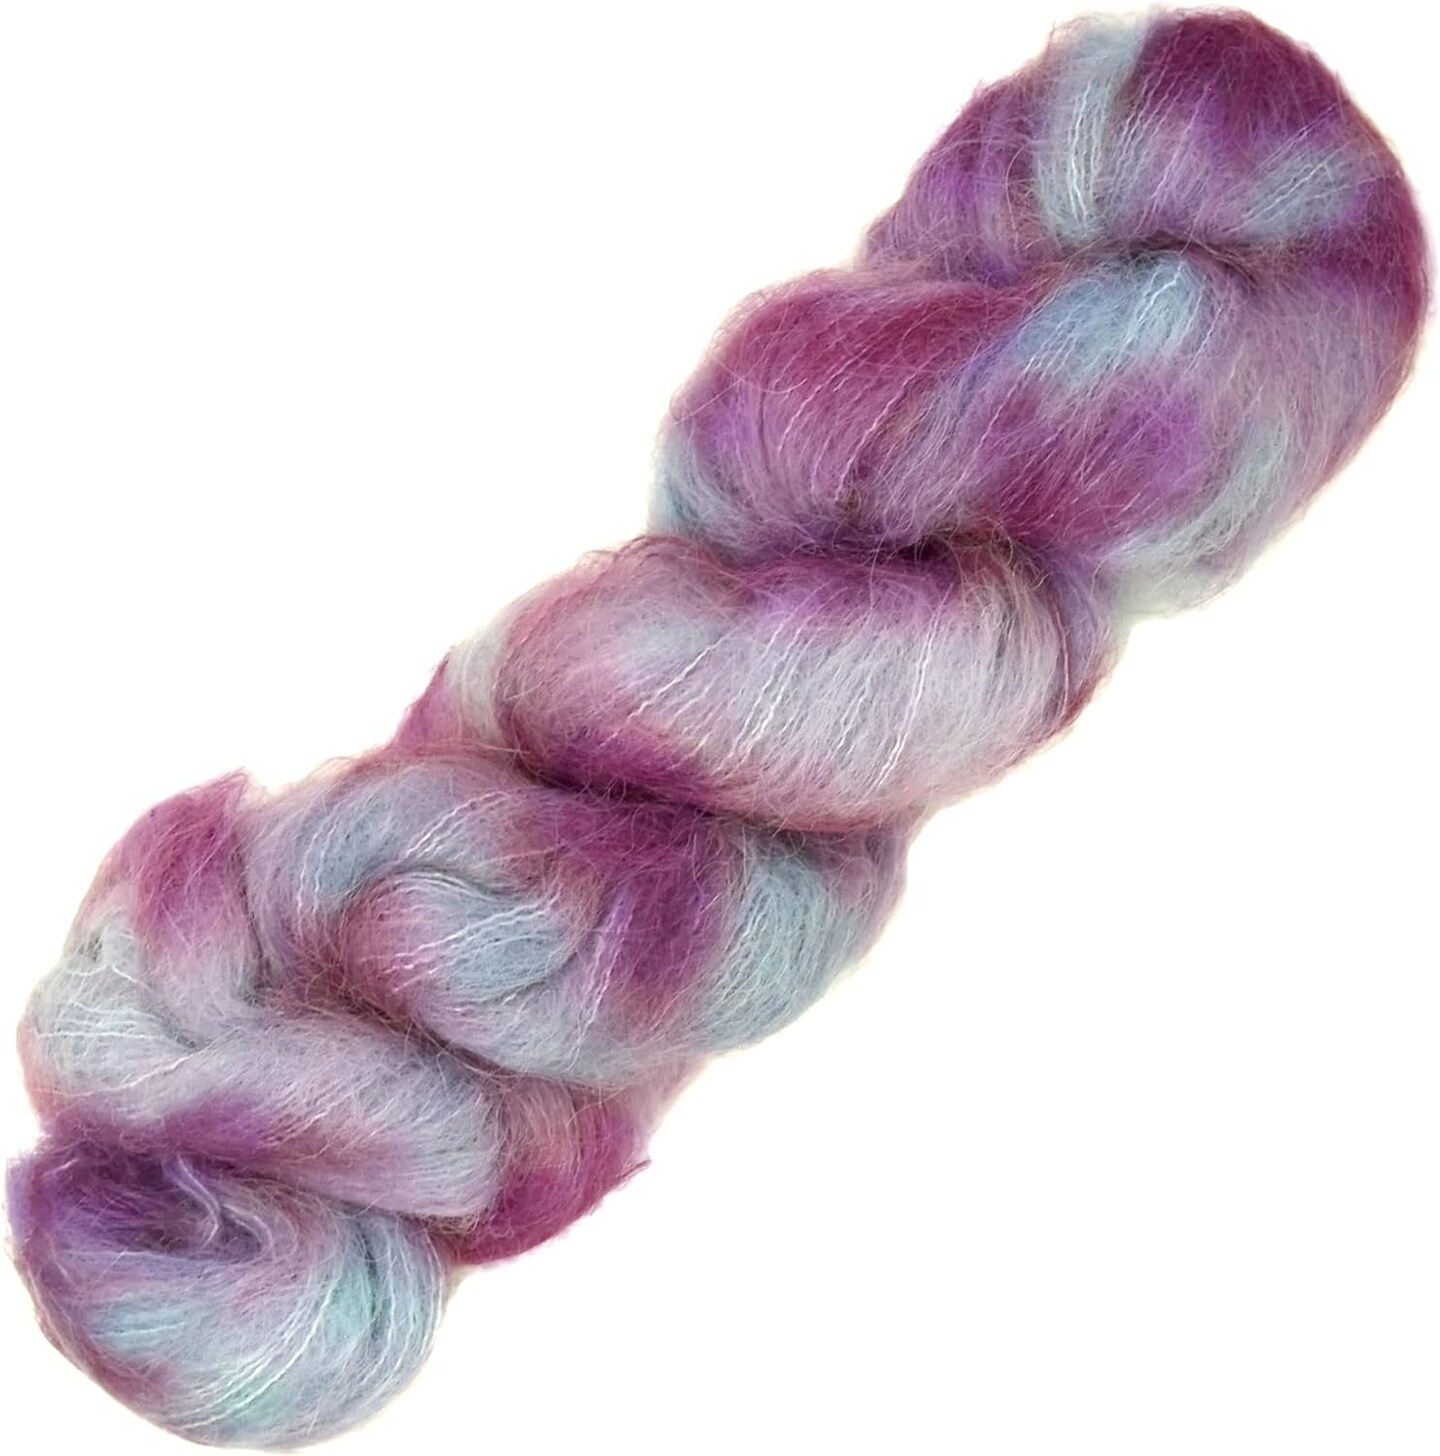 Suri Sensation Brushed Suri Alpaca: Super-Soft Lace Weight Yarn for Knit and Crochet, Non-Itchy, Pacific Northwest Hand Dyed.